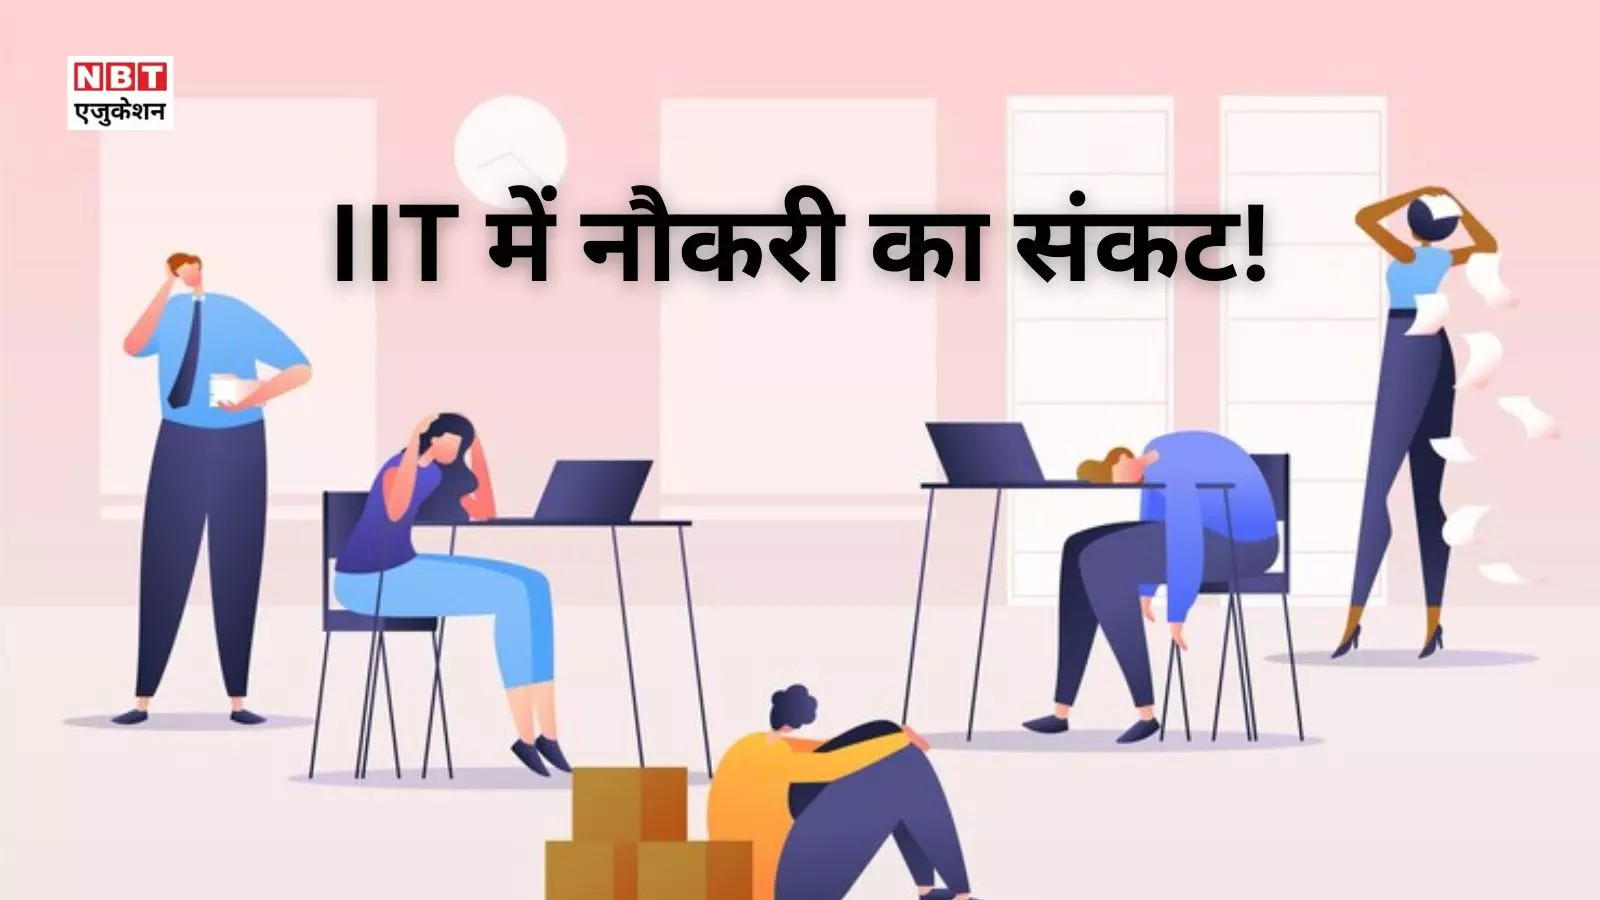 'Bad condition' of IIT!  More than 7000 did not get jobs, top colleges are asking for help from their own students